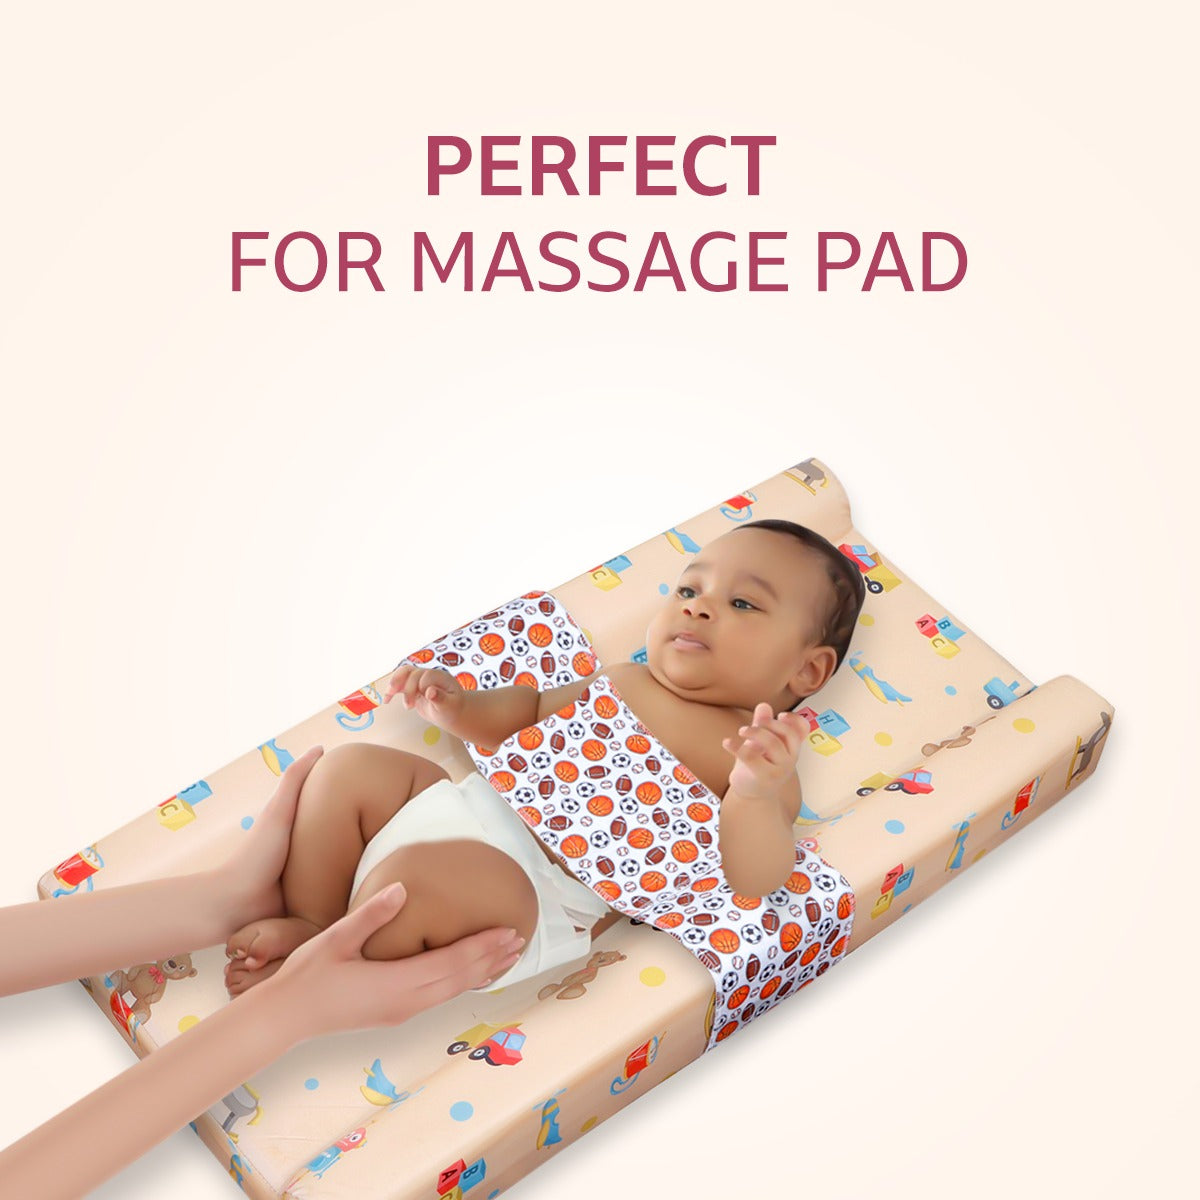 Diaper Changing and Massage Bed/Pad with Safety Belt for Newborn